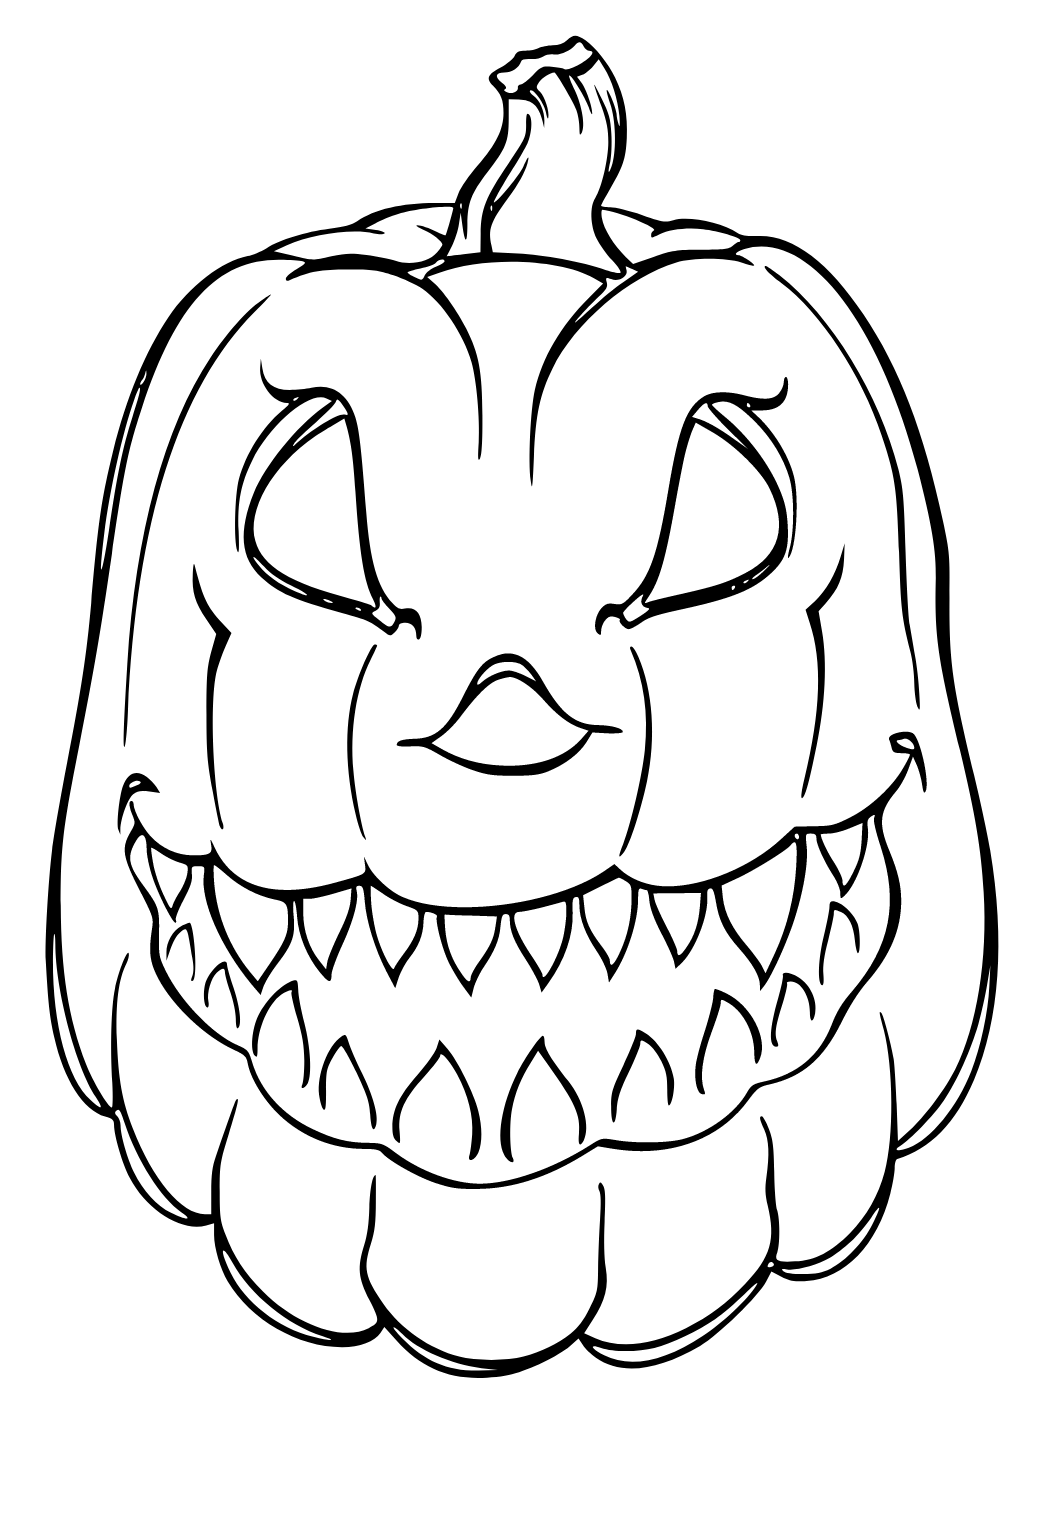 Free printable creepy pumpkin coloring page for adults and kids